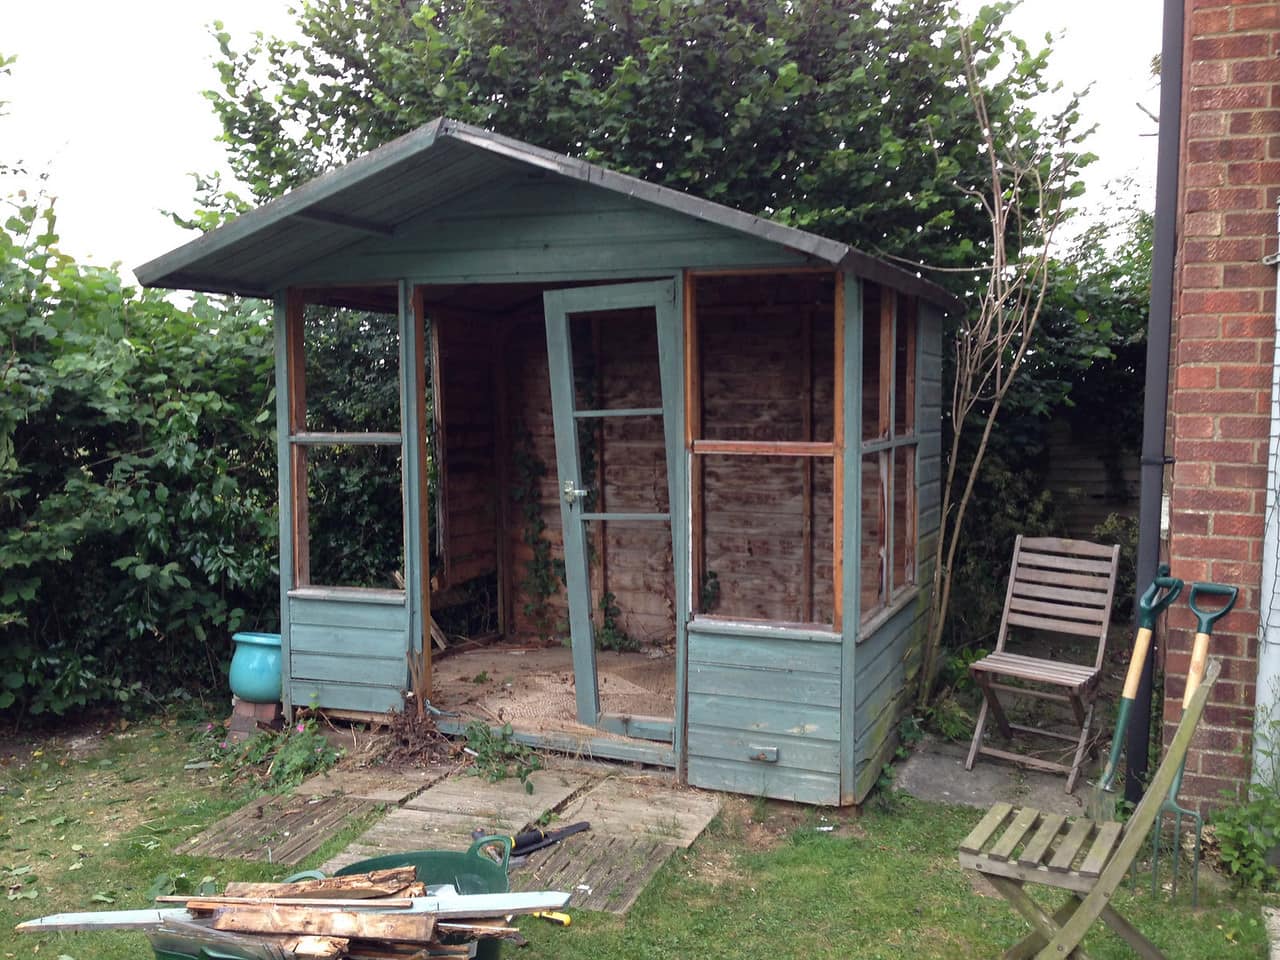 A rotten wooden summerhouse, in the midst of being demolished